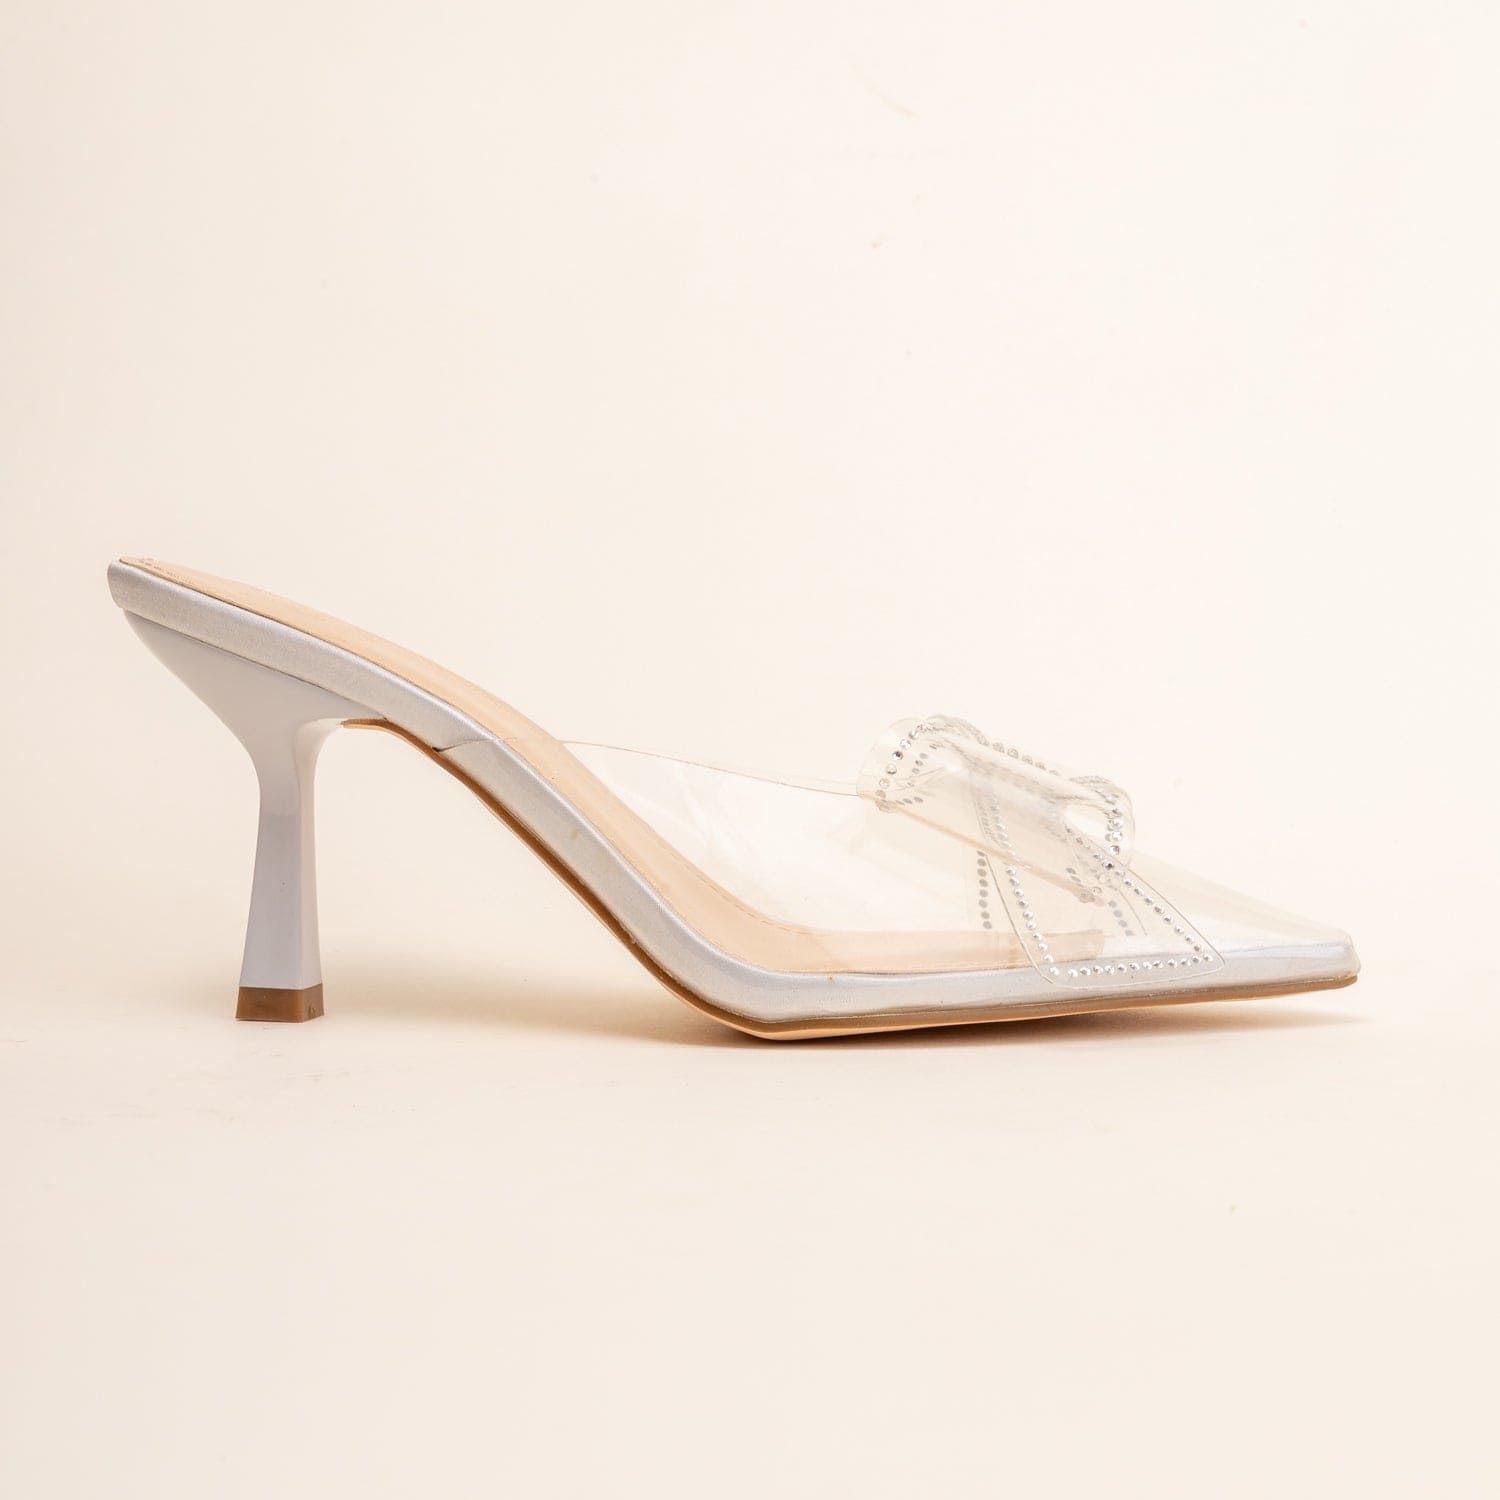 JELLO-Stylish Pumps With Bow in-Silver.